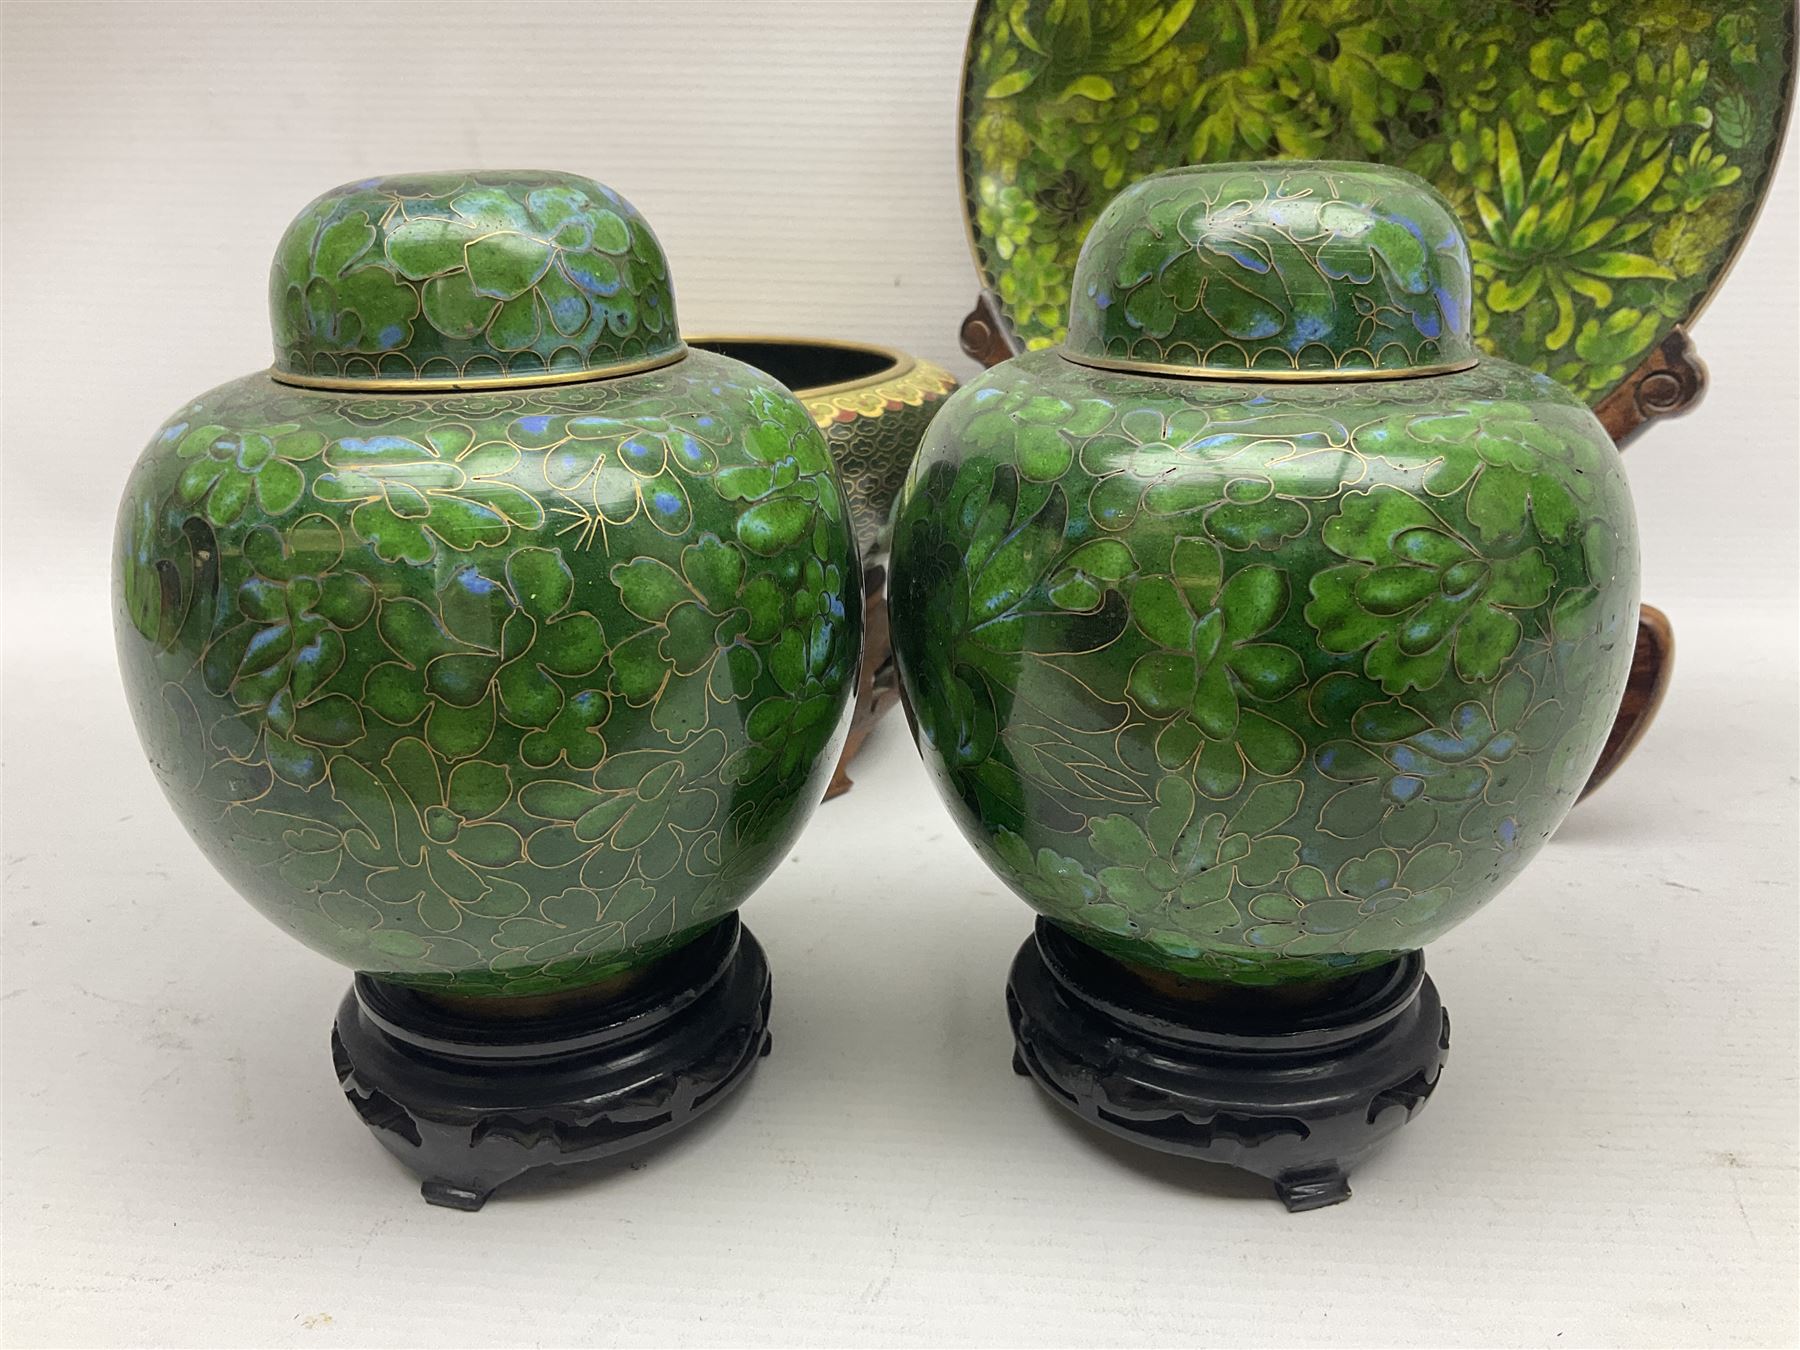 Pair of modern cloisonne ginger jars having floral decoration with a green ground - Image 2 of 13